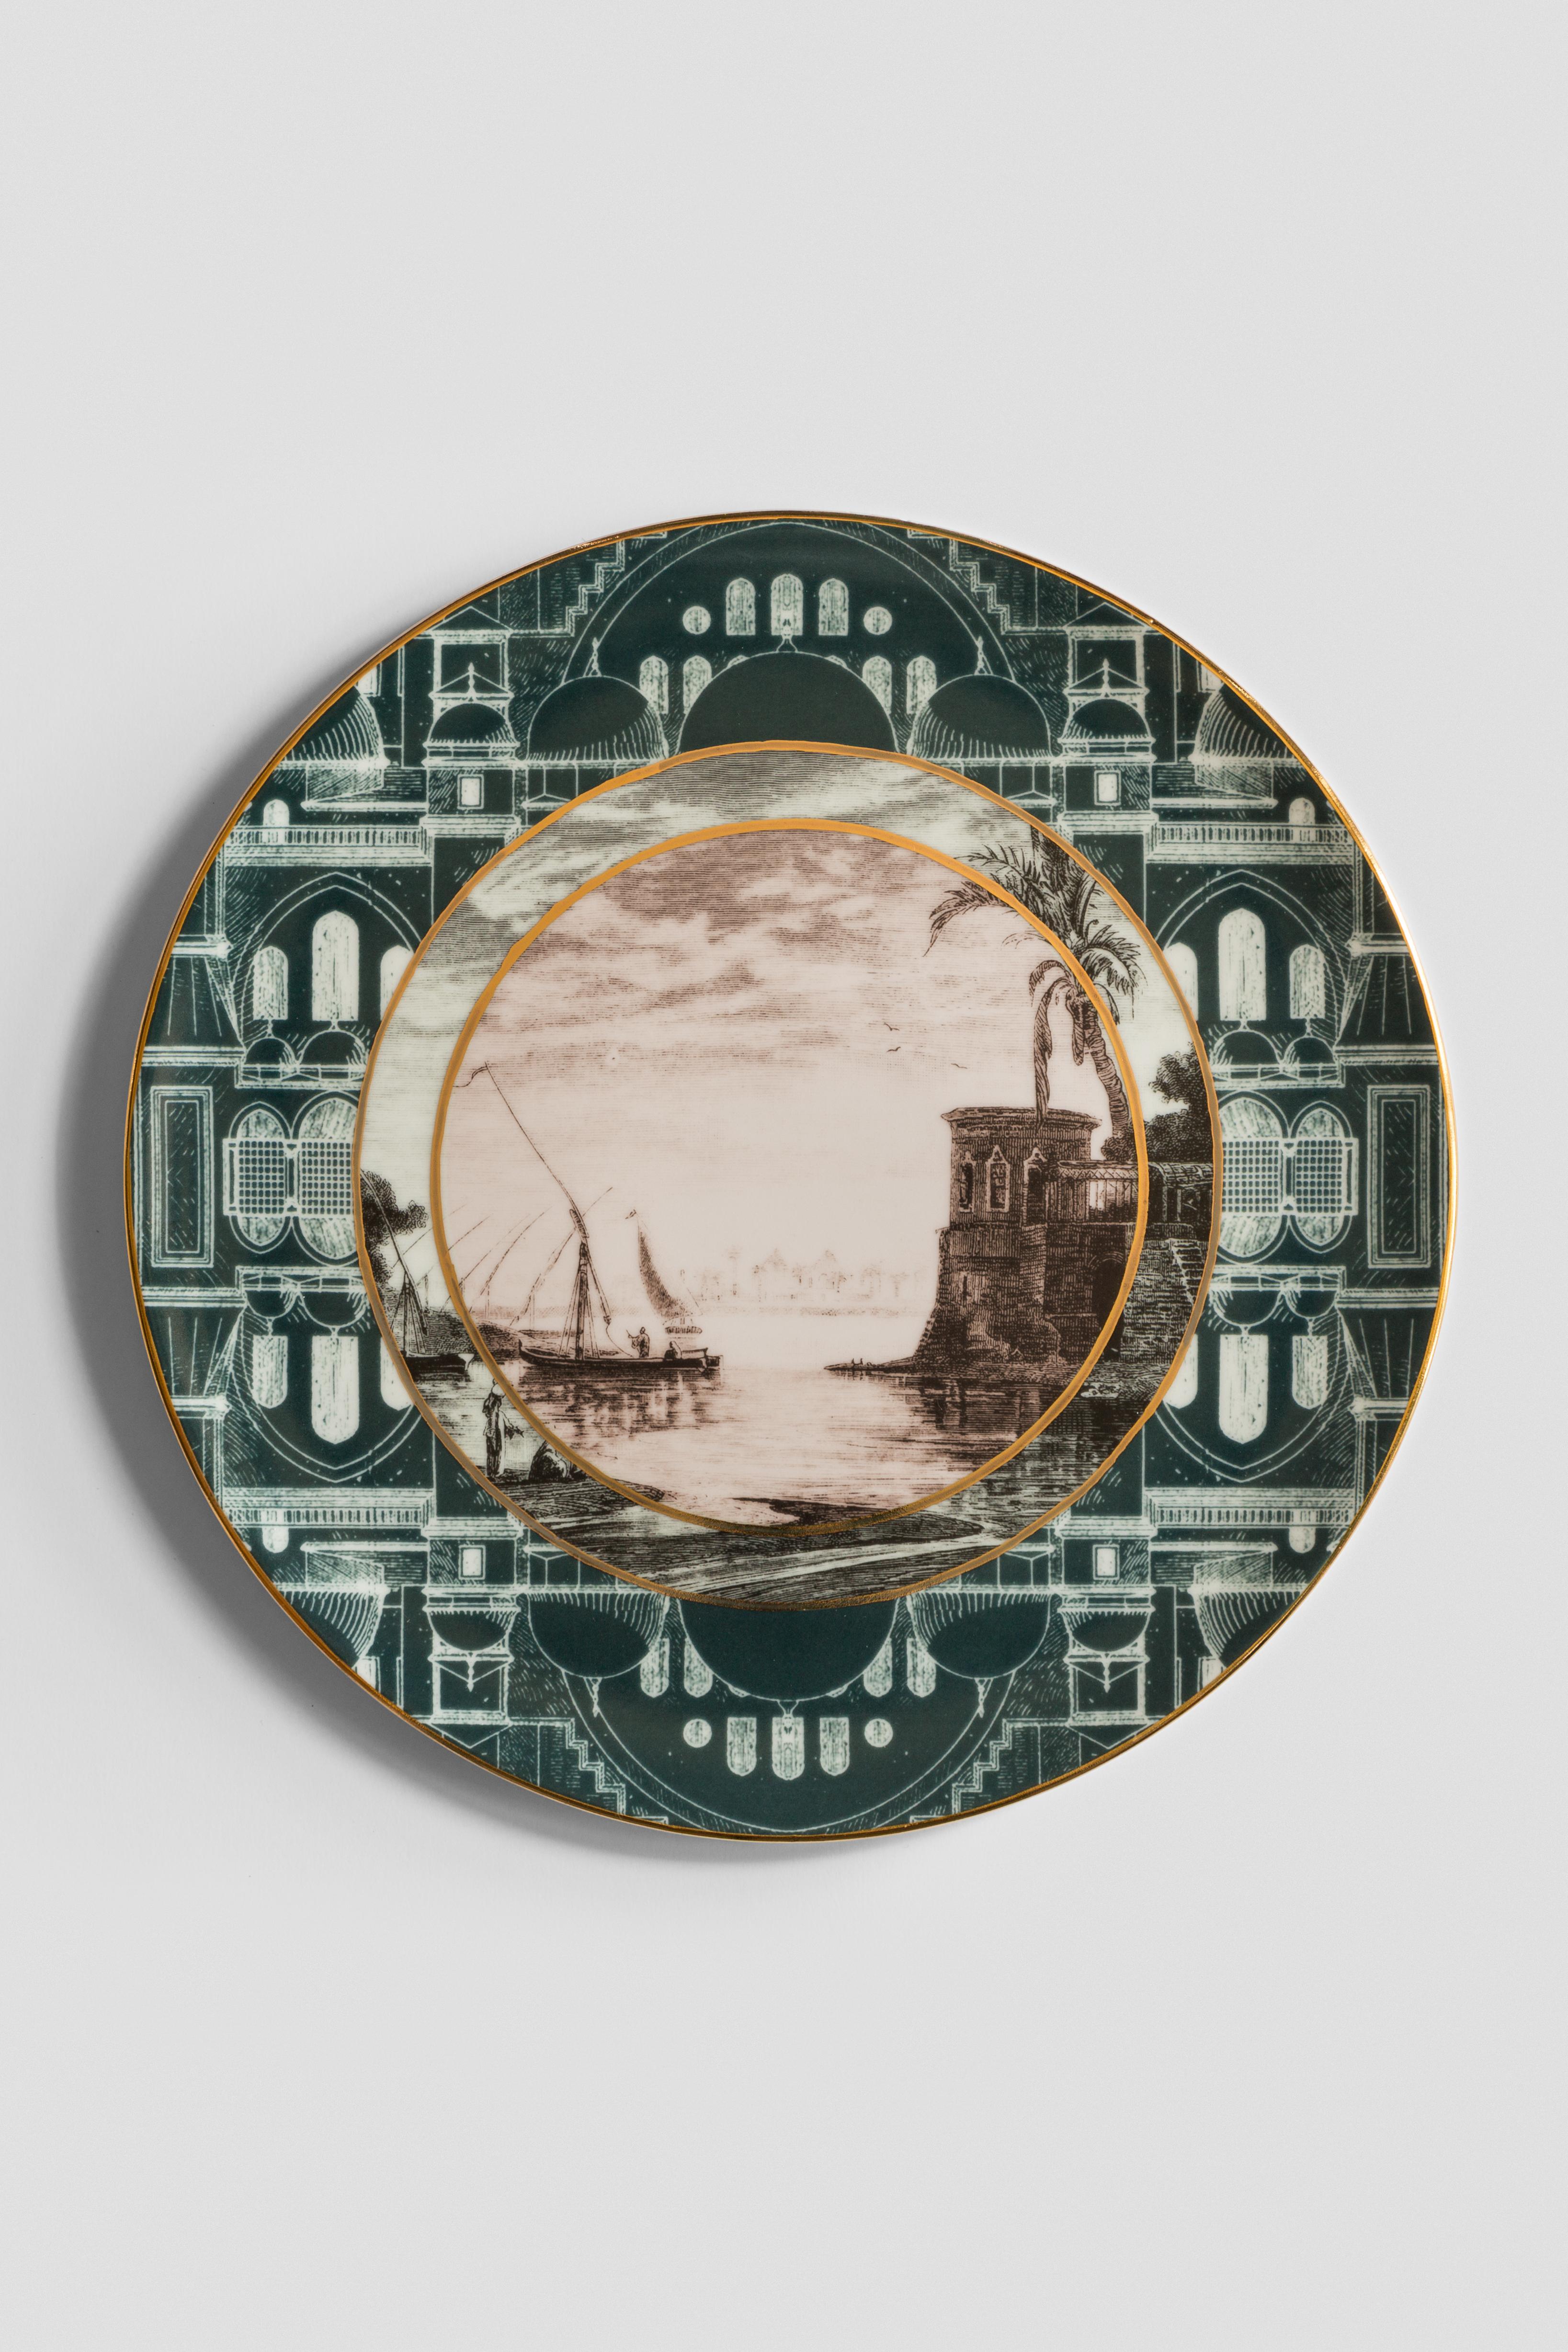 A striking collection of six designs that will enrich both a Classic and a modern home with the unique combination of vintage images and strikingly warm colors, this set comprises the six porcelain dinner plates of the Lebanon collection. In them, a